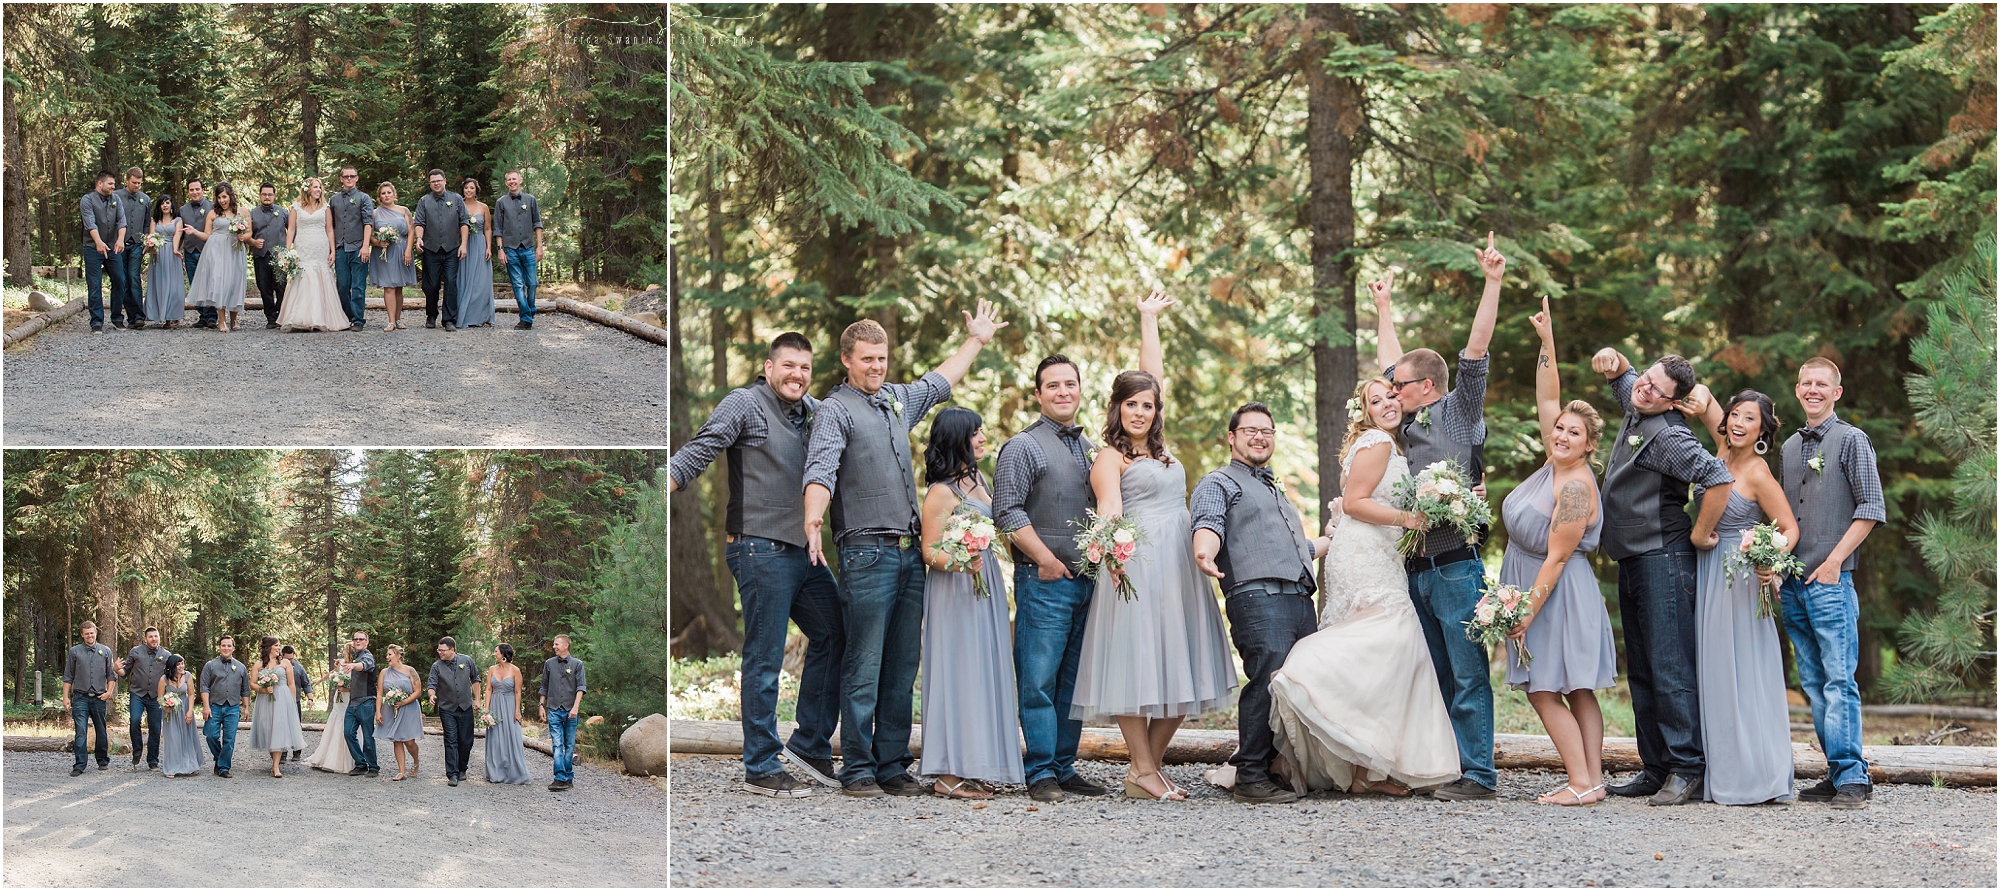 A fun bridal party photo from this rustic Oregon lodge wedding in Bend. 